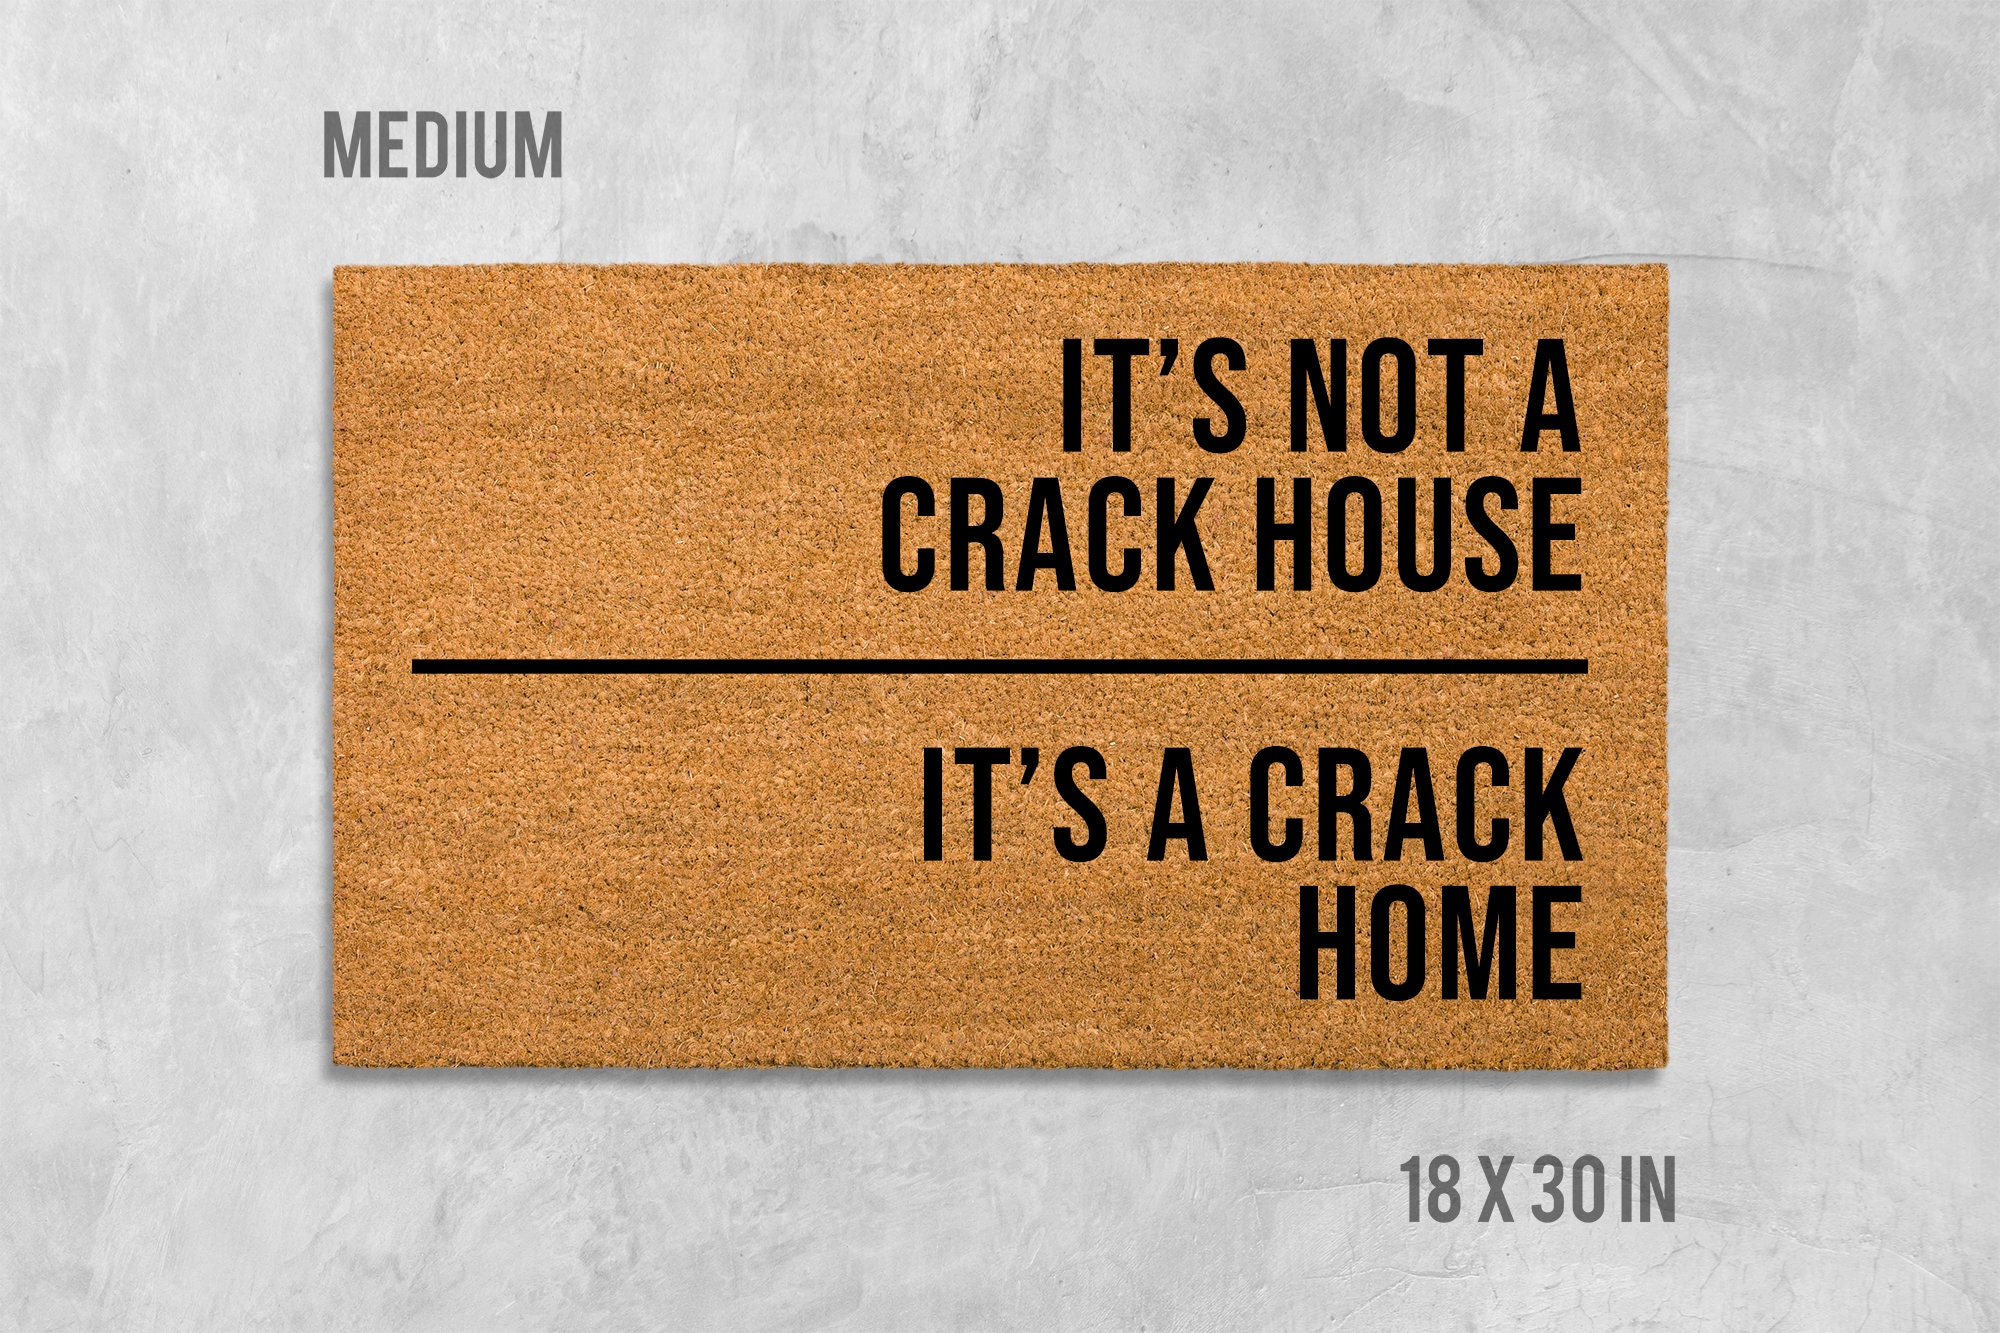 Crack House. Its a room